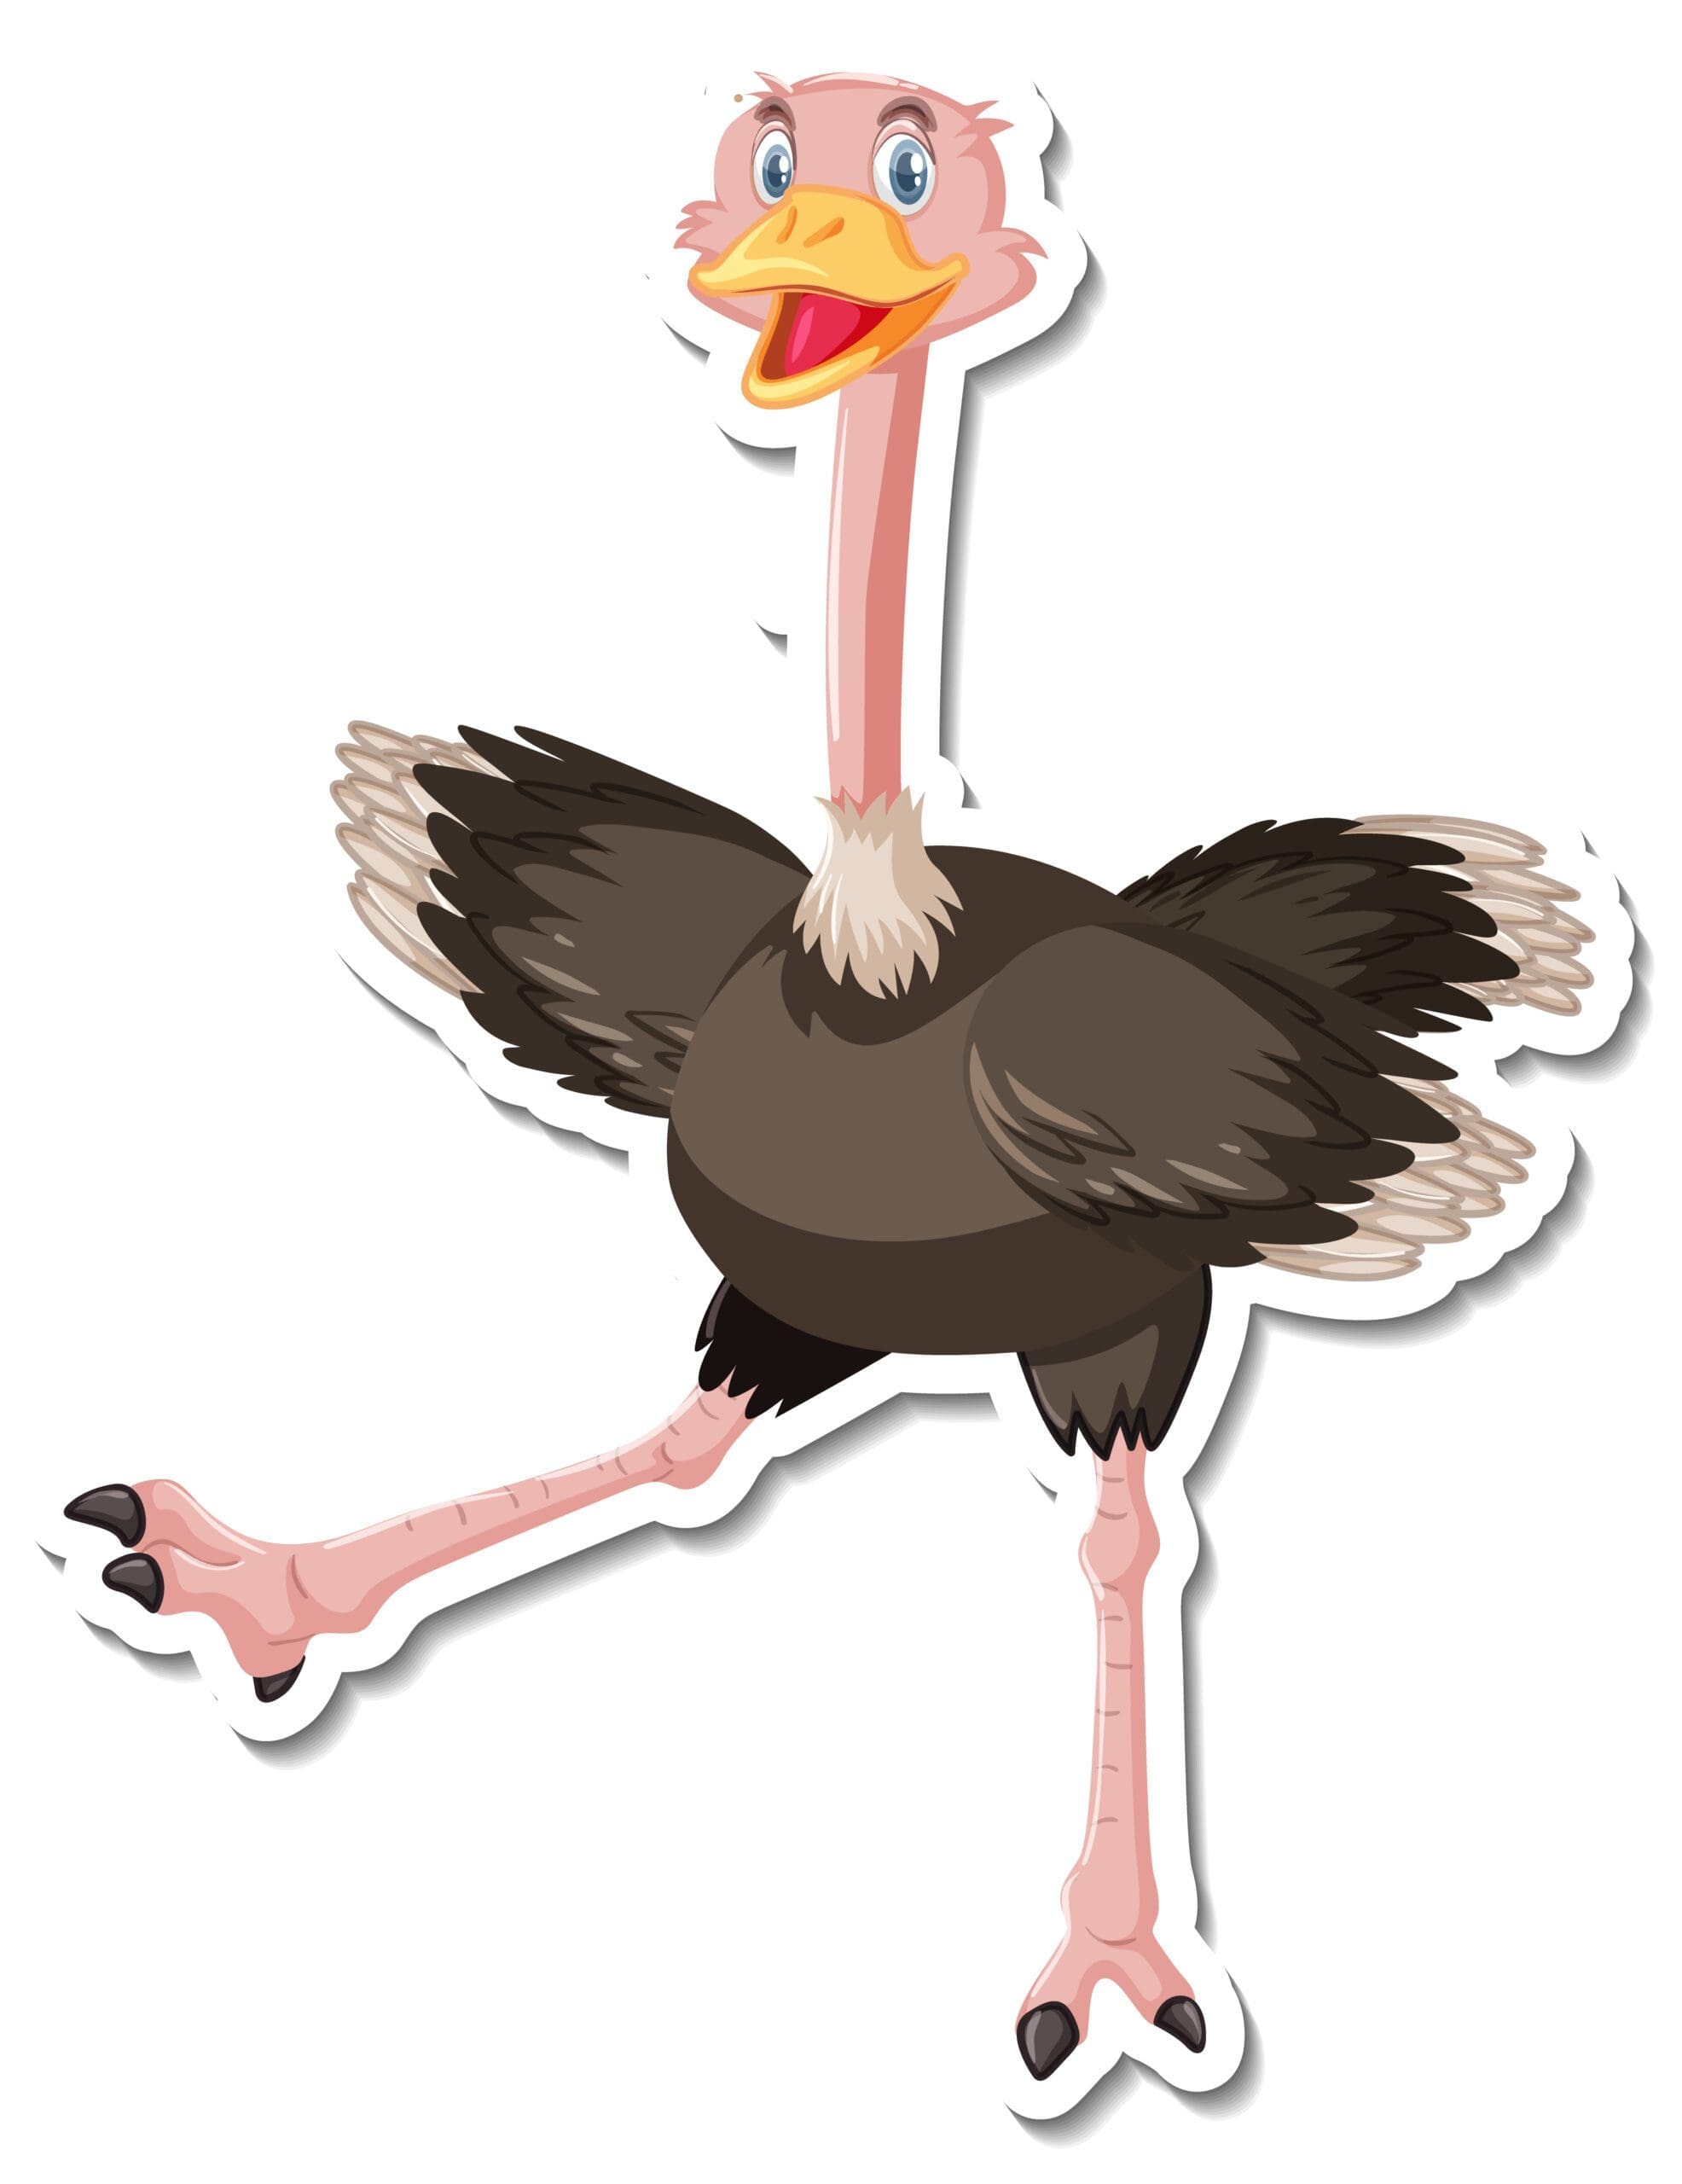 Cartoon graphic of an ostrich with shades, looking cool.